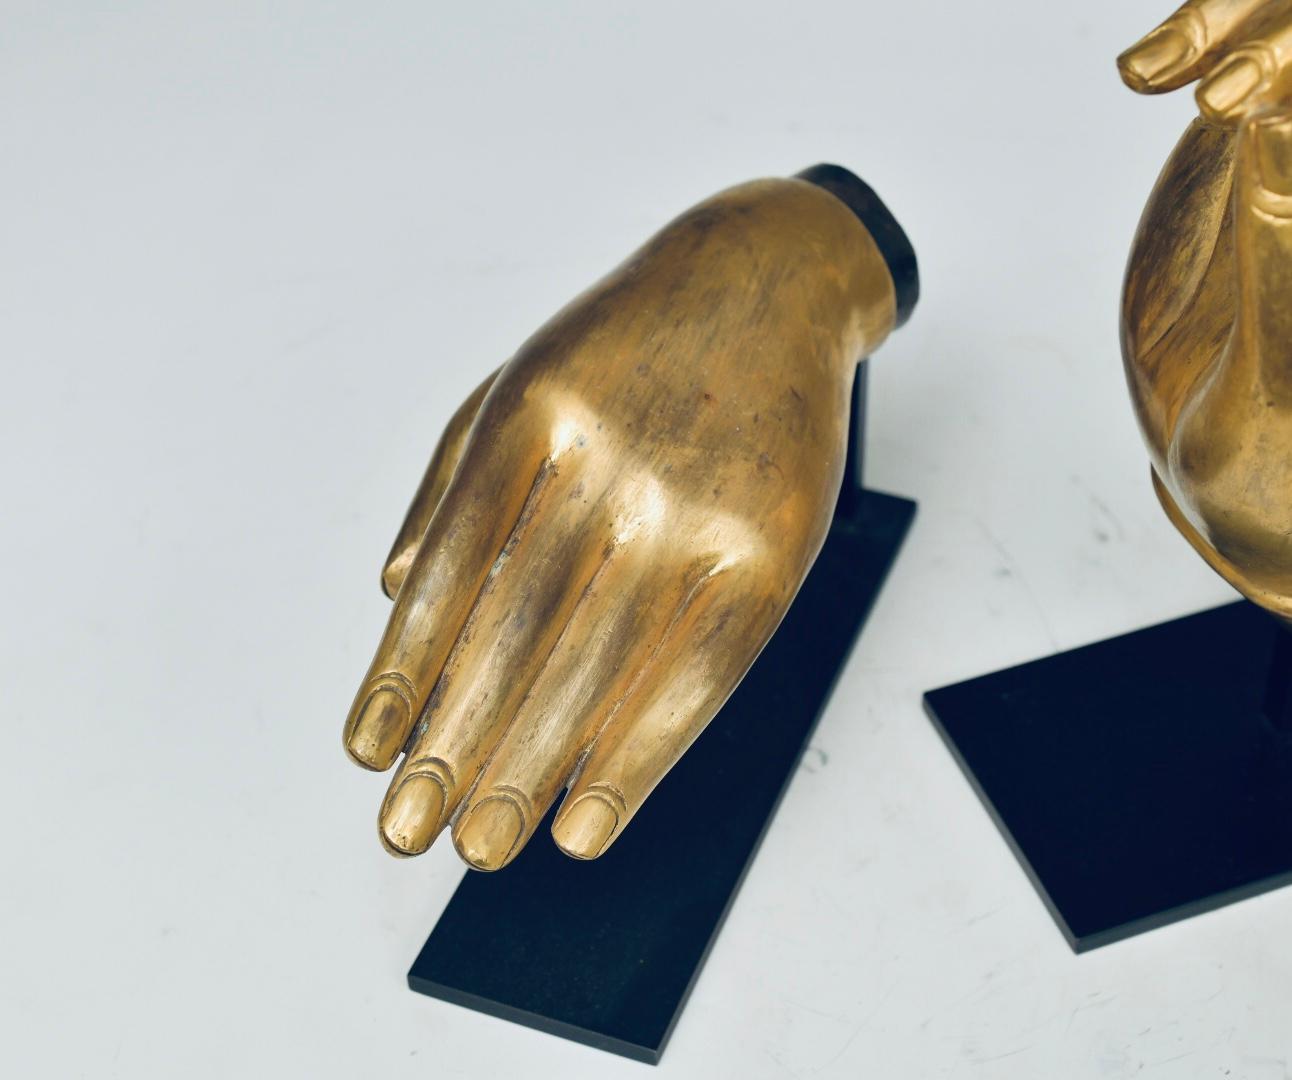 Fine cast gilt bronze Buddha hands from Tibet, left hand in giving mudra and right hand in teaching mudra.
Left hand dimension: 9/L x 5/H x 4/D
Right hand dimension: 4/L x 11.5/H x 5/D.